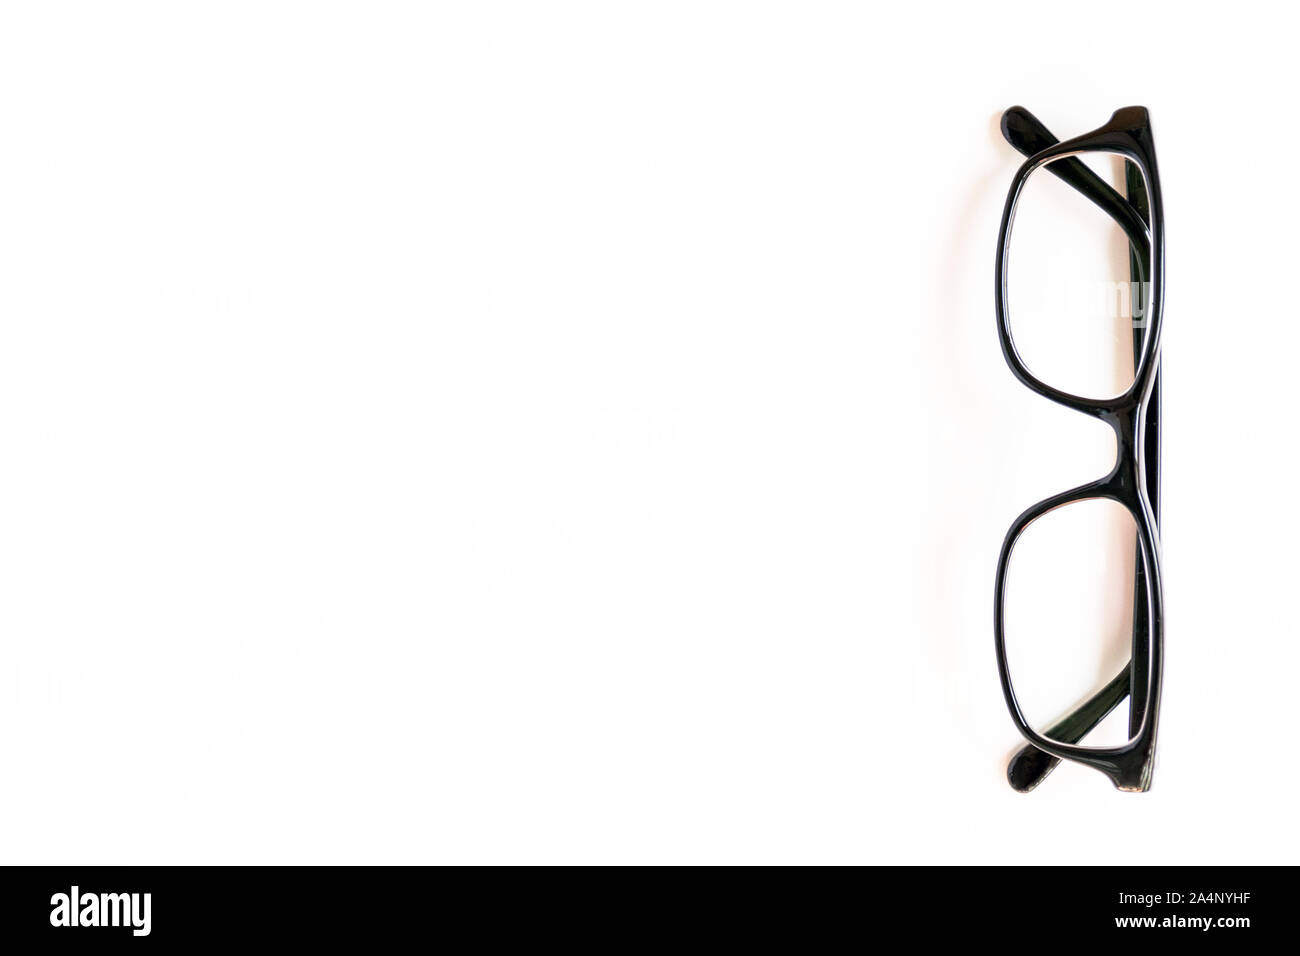 Fasion spectacles on white background. Healthy vision, trendy accessory. Stock Photo